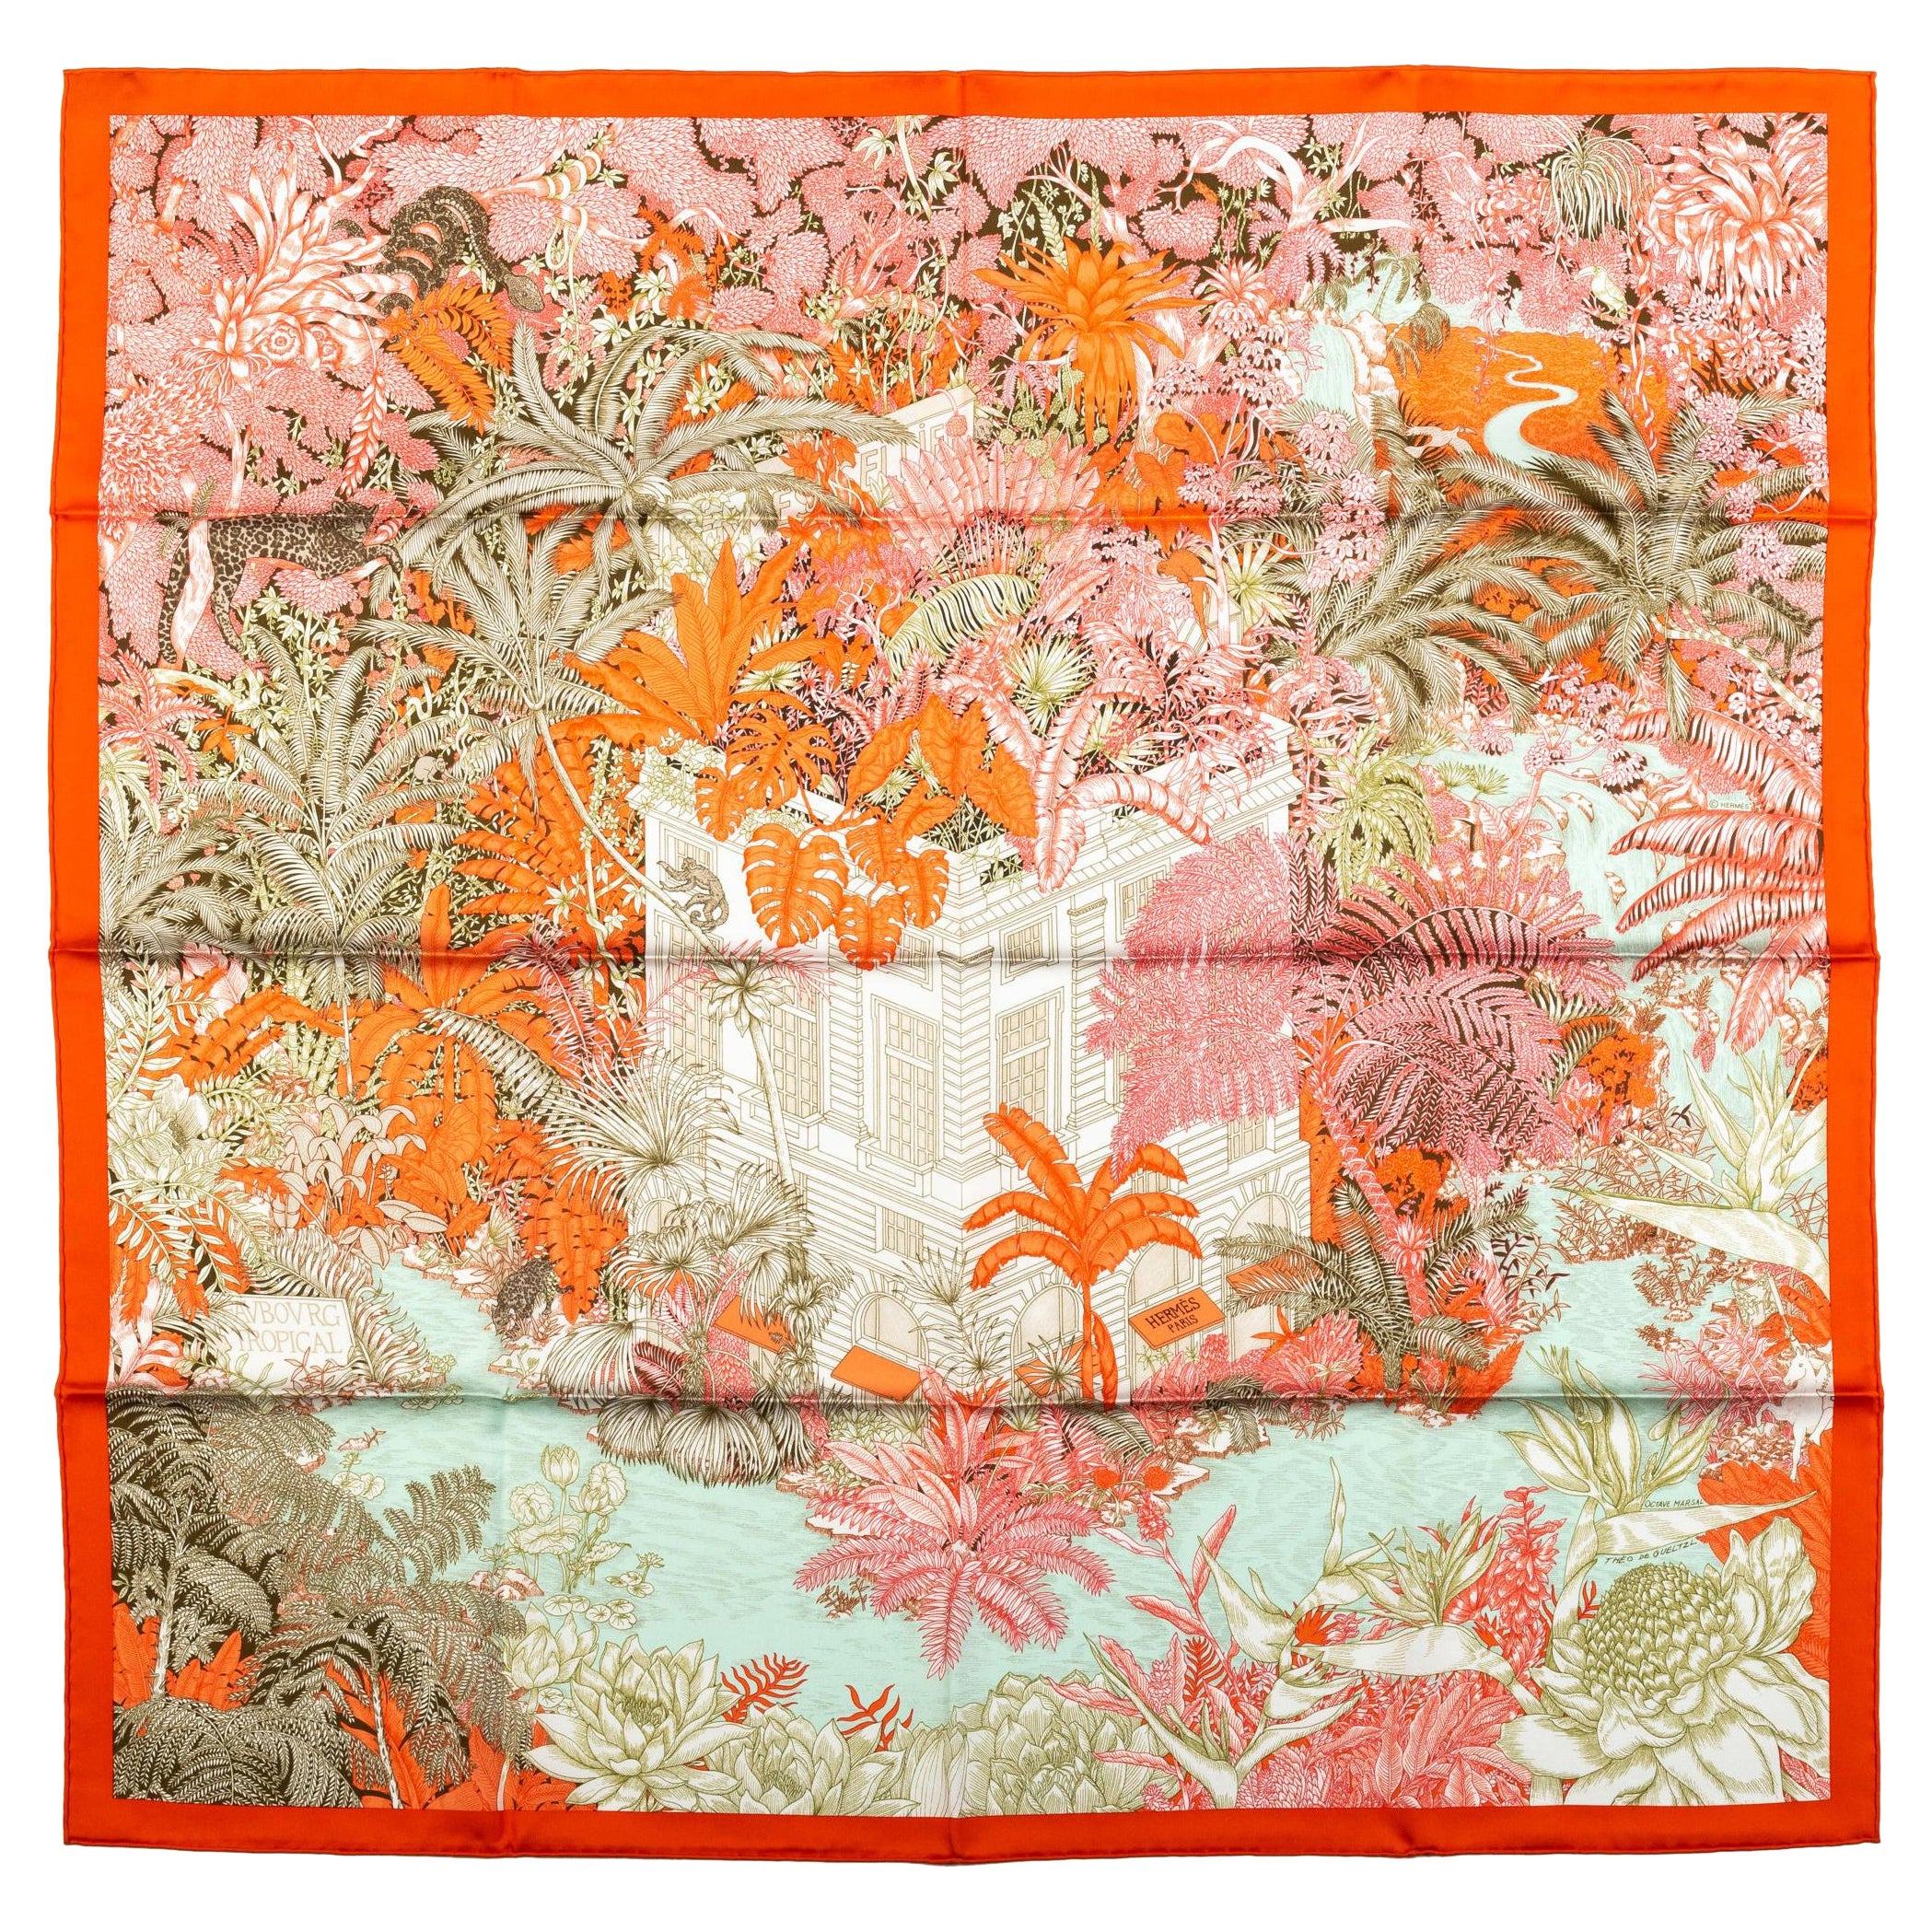 New in Box Hermes Tropical Garden Silk Scarf For Sale